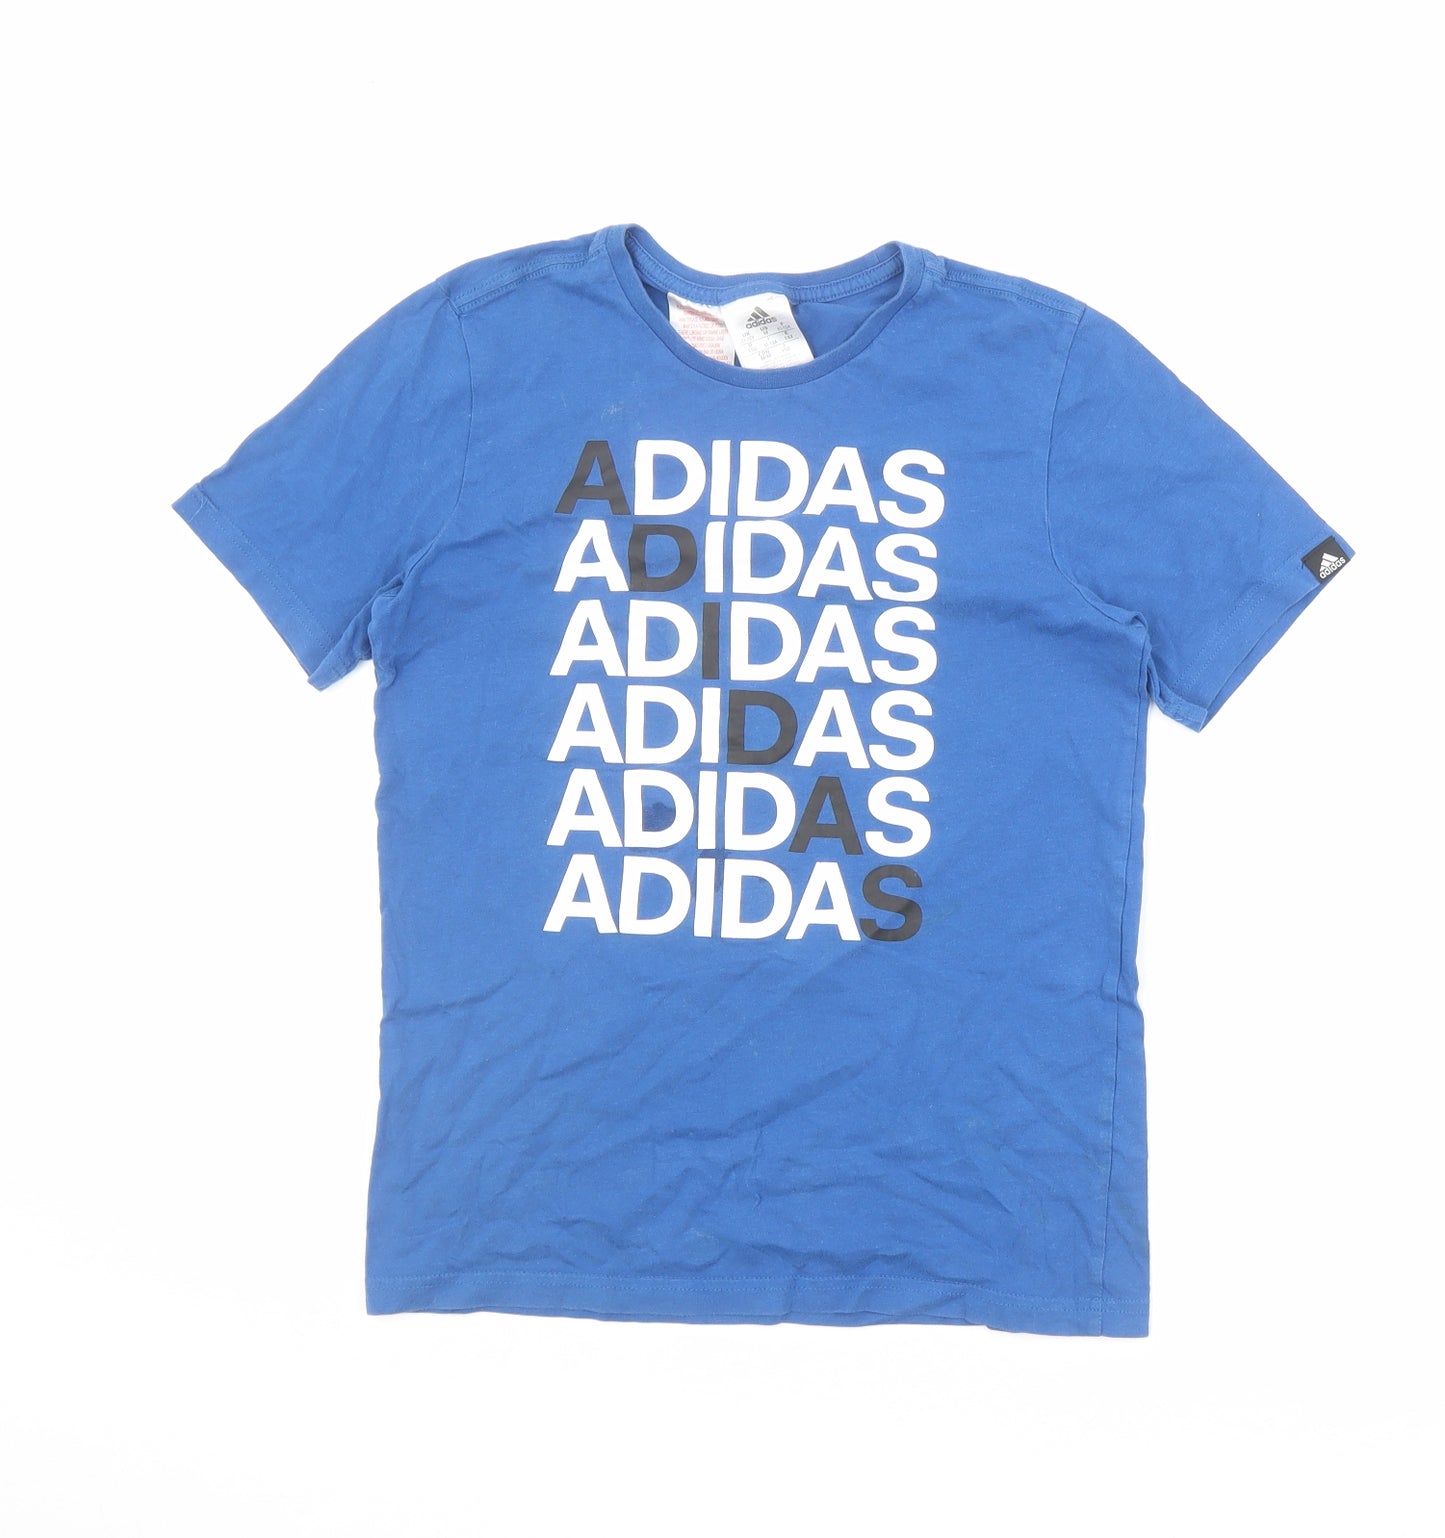 adidas Boys Blue 100% Cotton Basic T-Shirt Size 11-12 Years Round Neck Pullover